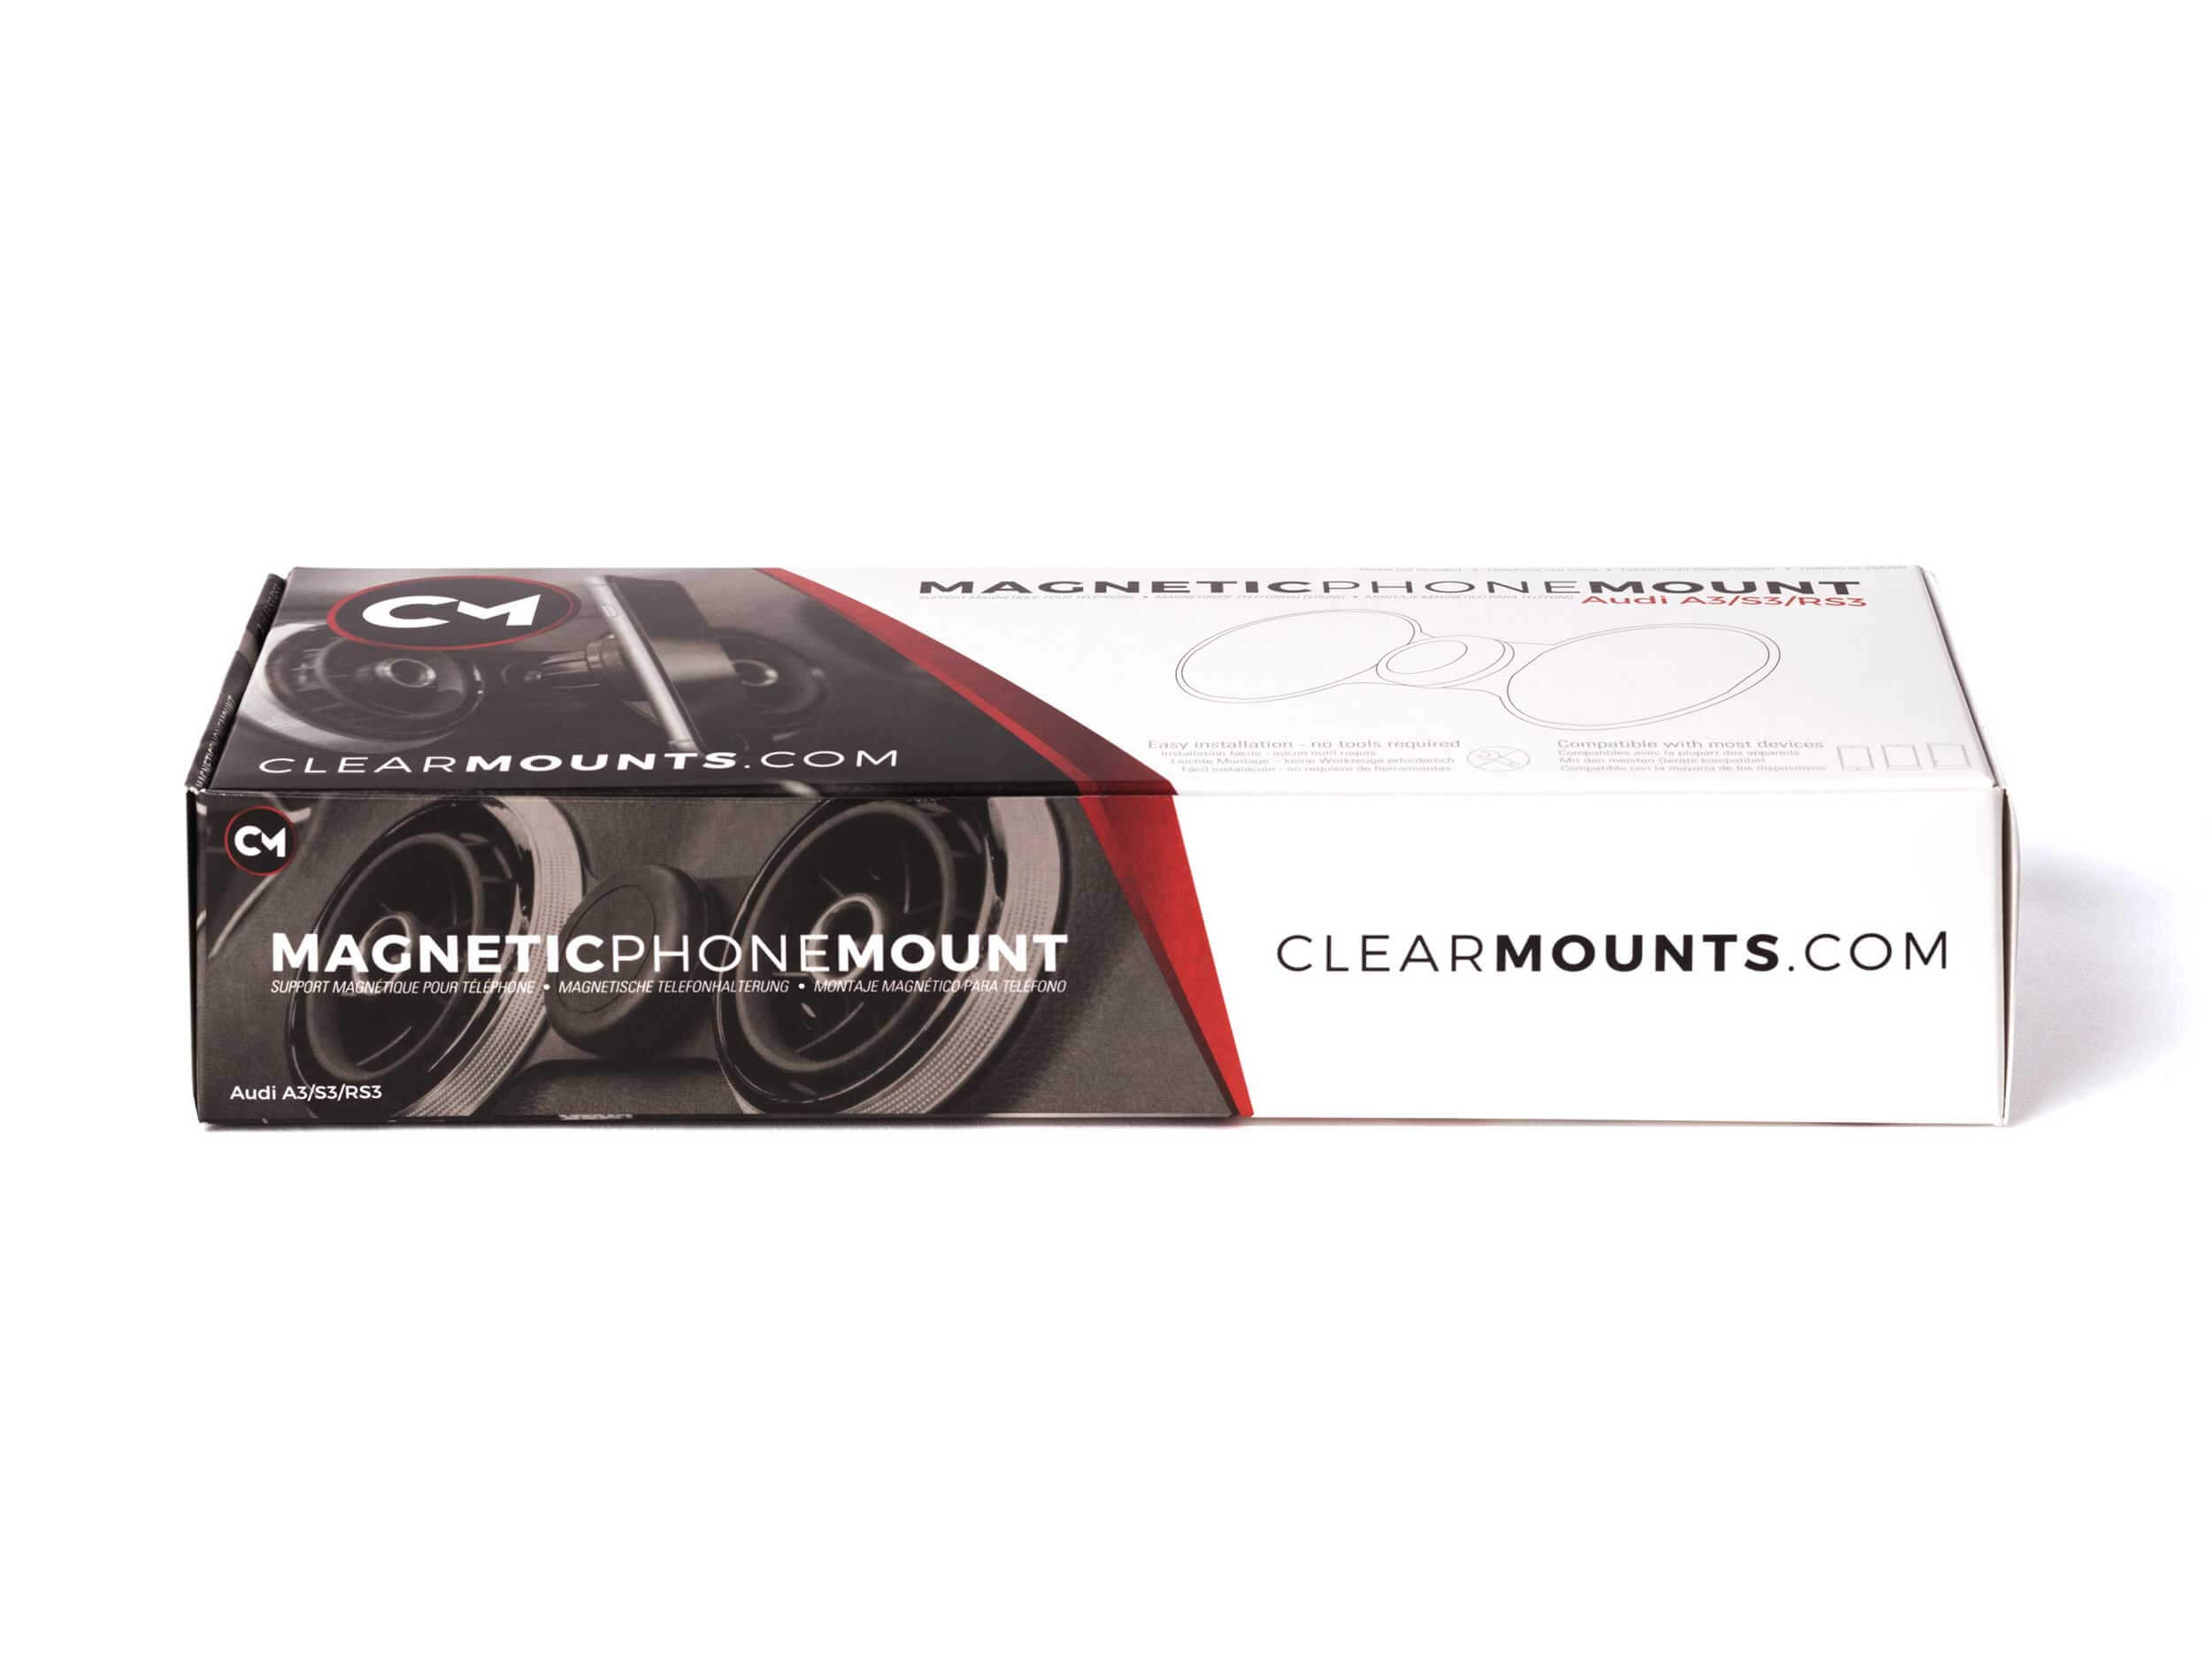 Clearmounts – Packaging 05